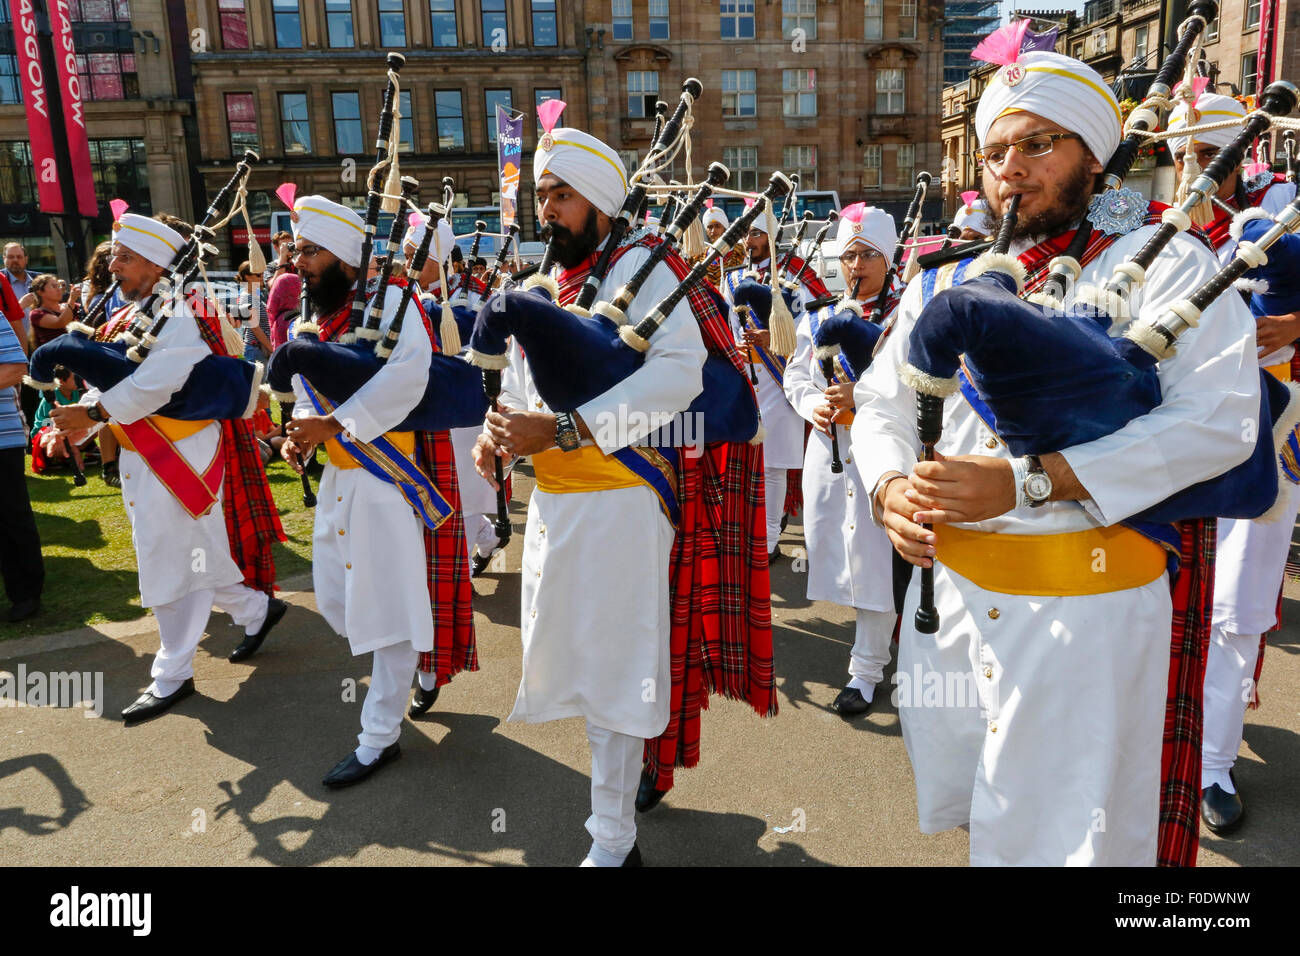 Glasgow, UK, 13th Aug, 2015. At Glasgow's annual Festival of Bagpipe music, 'Piping Live', which ends with the World Championship competition on Saturday 15th August, the National Pipe Band of Malaysia - 'The Sri Dasmesh Pipe Band' based in Kuala Lumpar, entertained the crowds in Buchanan Street and George Square, by playing a medley of Scottish bagpipe music on a sunny day in Scotland. Credit:  Findlay/Alamy Live News Stock Photo